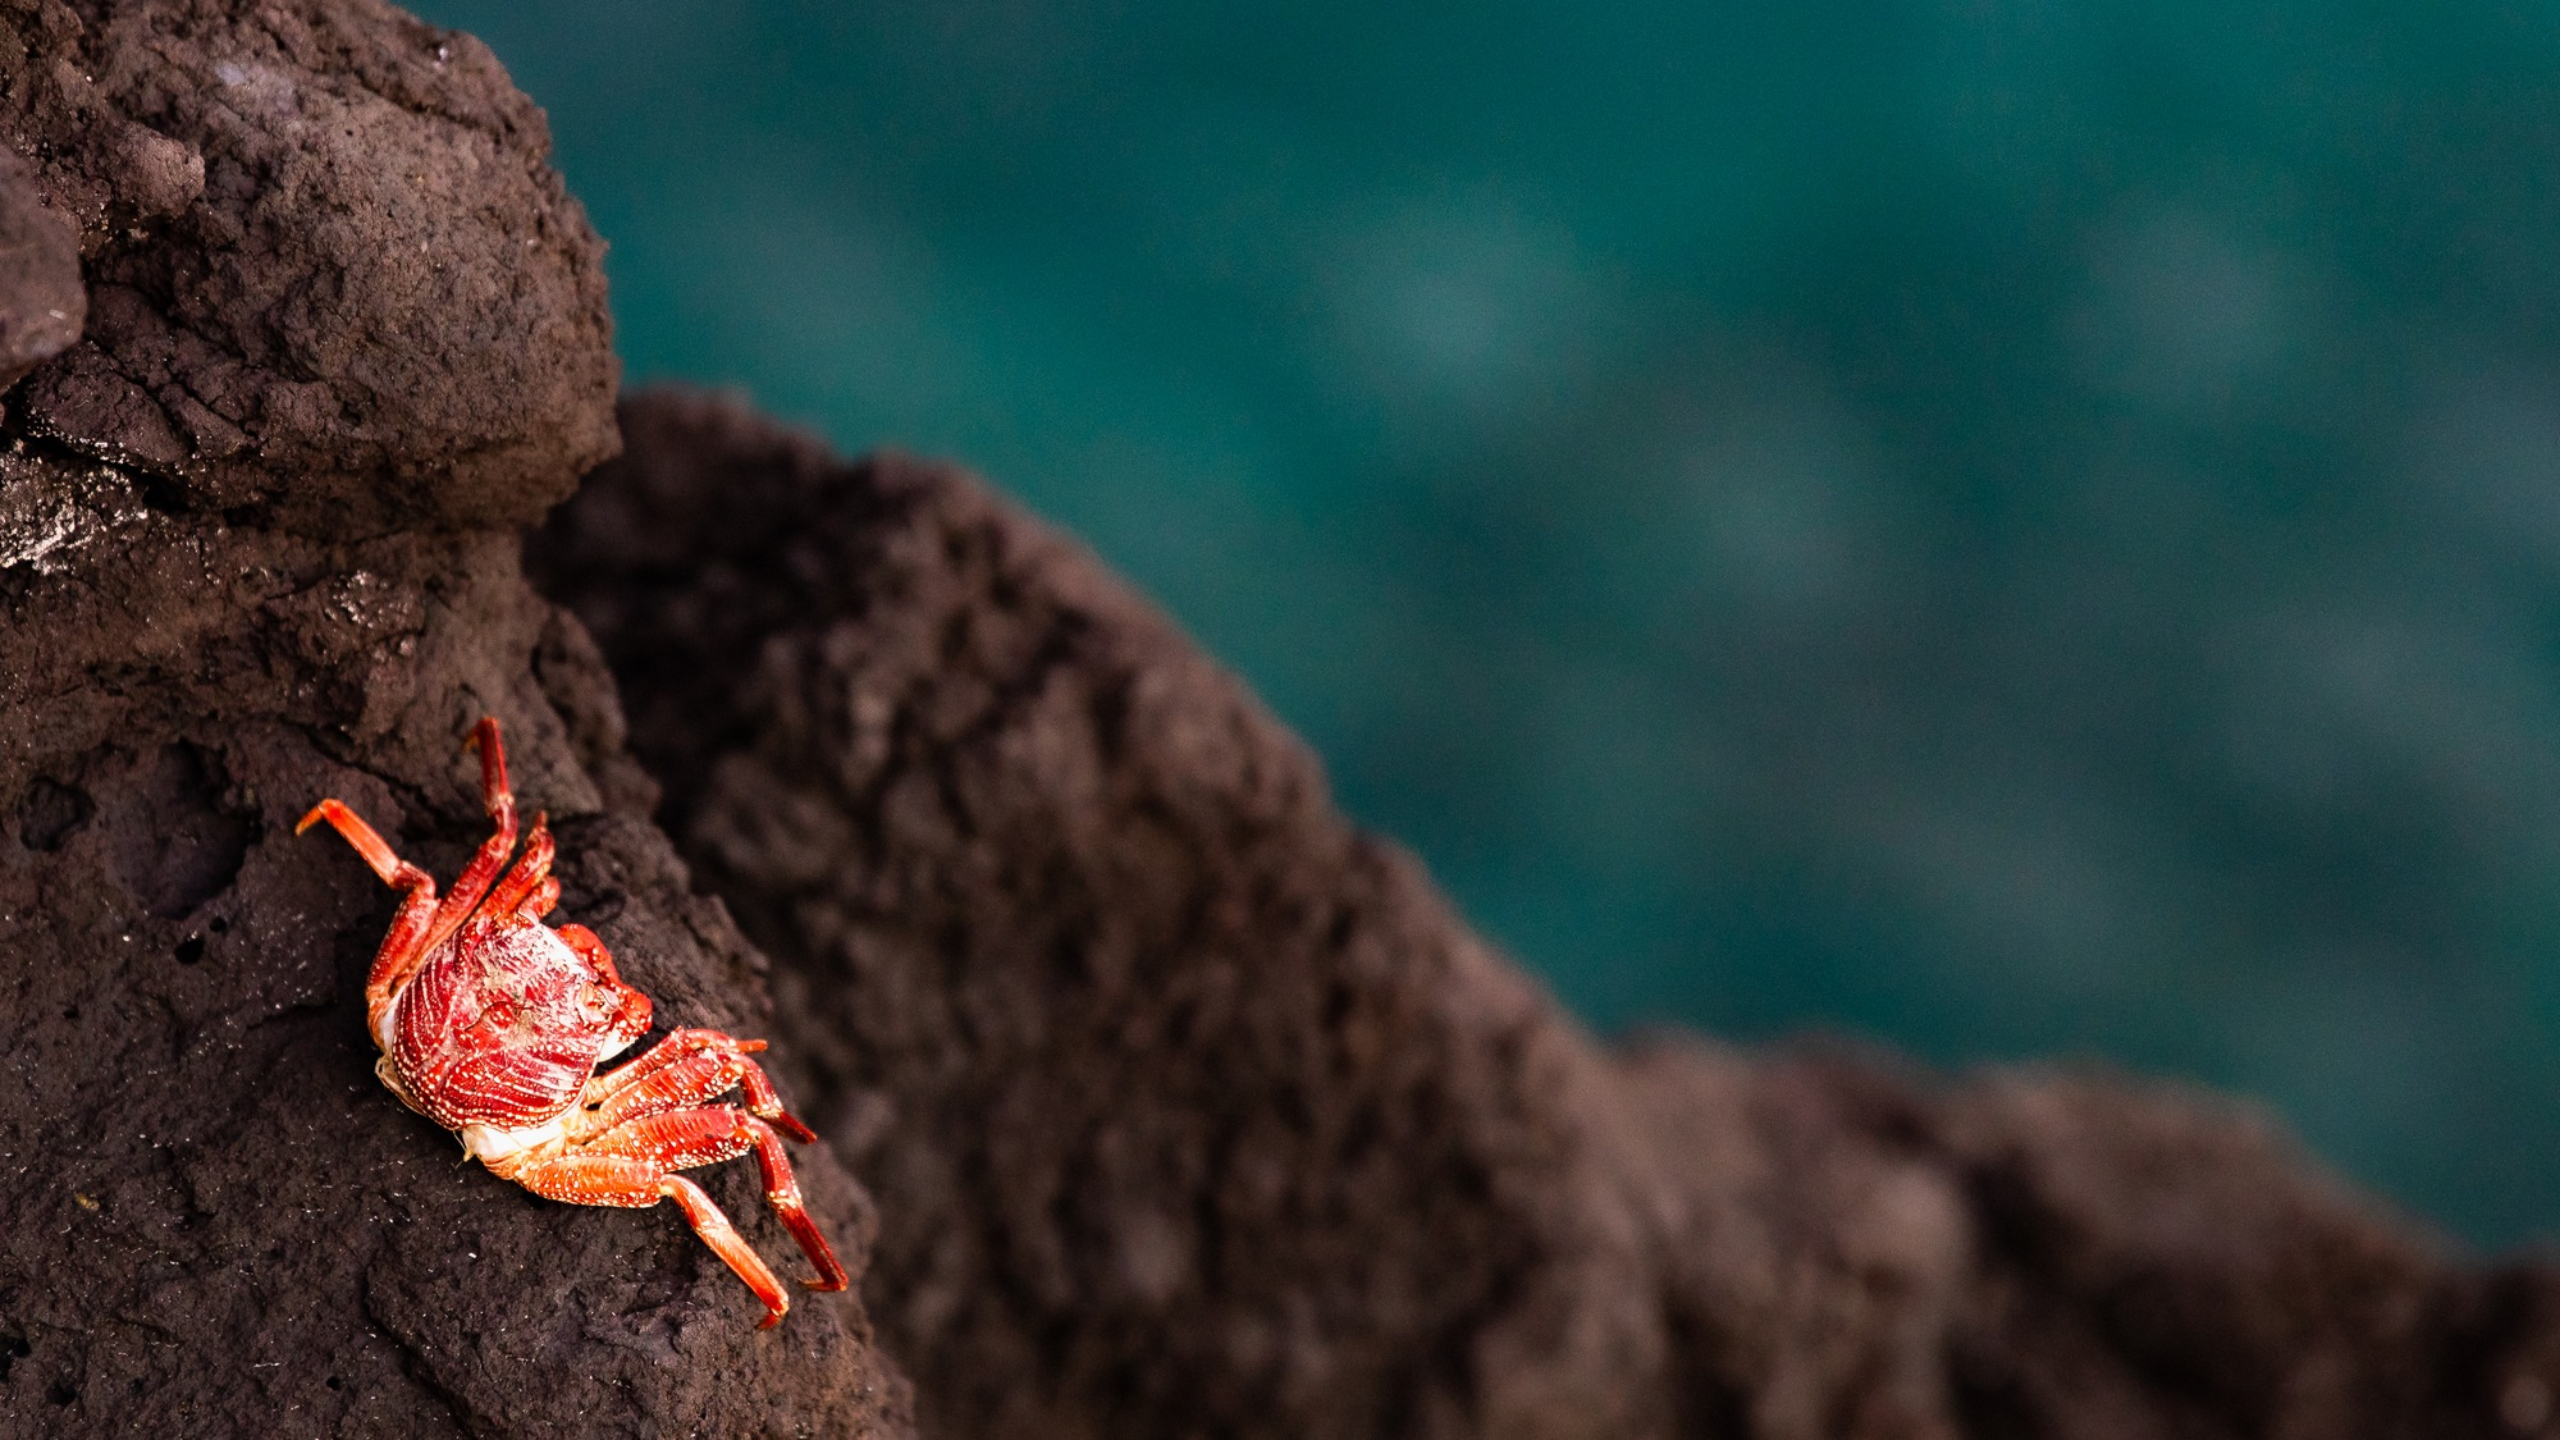 While masses of dead red crabs are known to wash up on beaches in California and Mexico, how millions of crab carcasses got to the bottom of the Pacific Ocean remains a mystery.